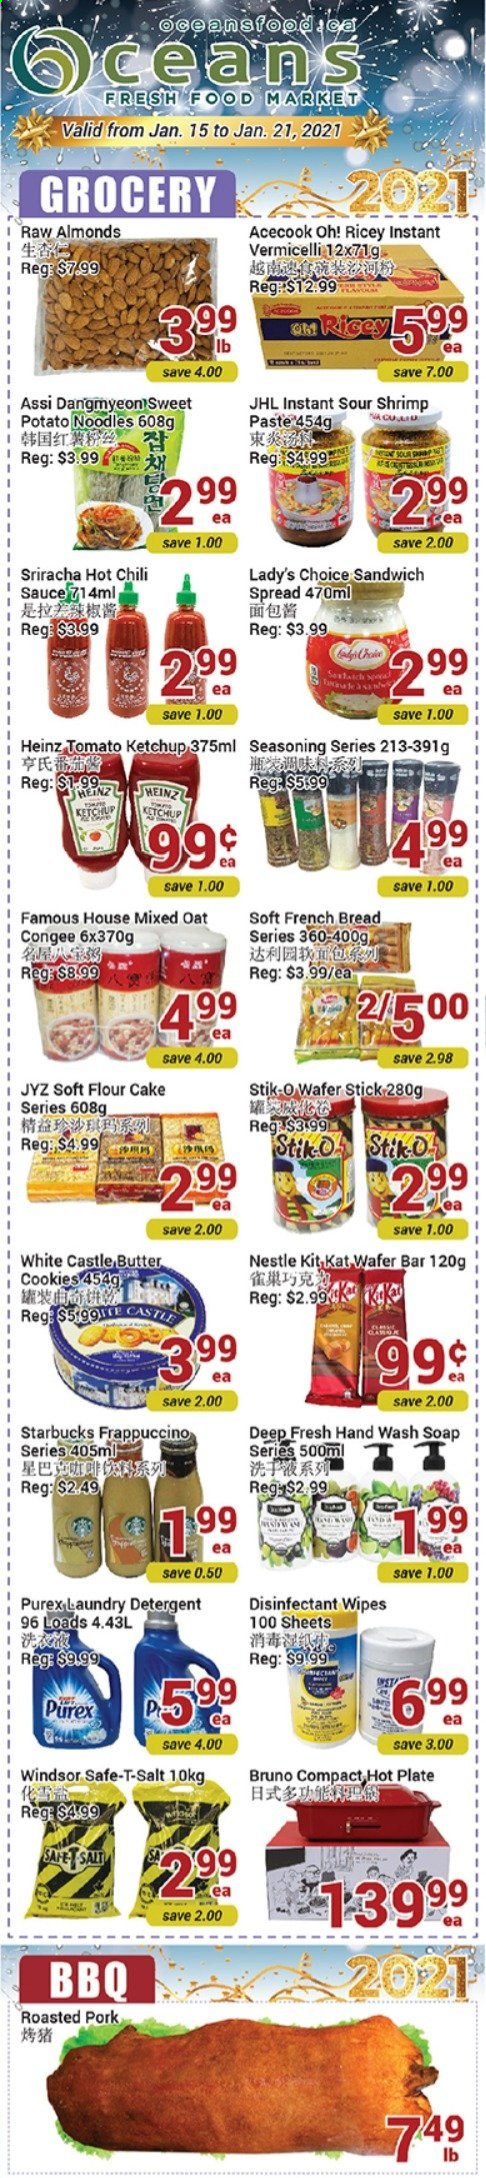 thumbnail - Oceans Flyer - January 15, 2021 - January 21, 2021 - Sales products - bread, french bread, sweet potato, shrimps, sandwich, sauce, noodles, coffee drink, cookies, wafers, butter cookies, KitKat, flour, oats, spice, sriracha, ketchup, chilli sauce, almonds, Starbucks, frappuccino, Castle, wipes, detergent, laundry detergent, Purex, hand wash, Nestlé, Heinz. Page 1.